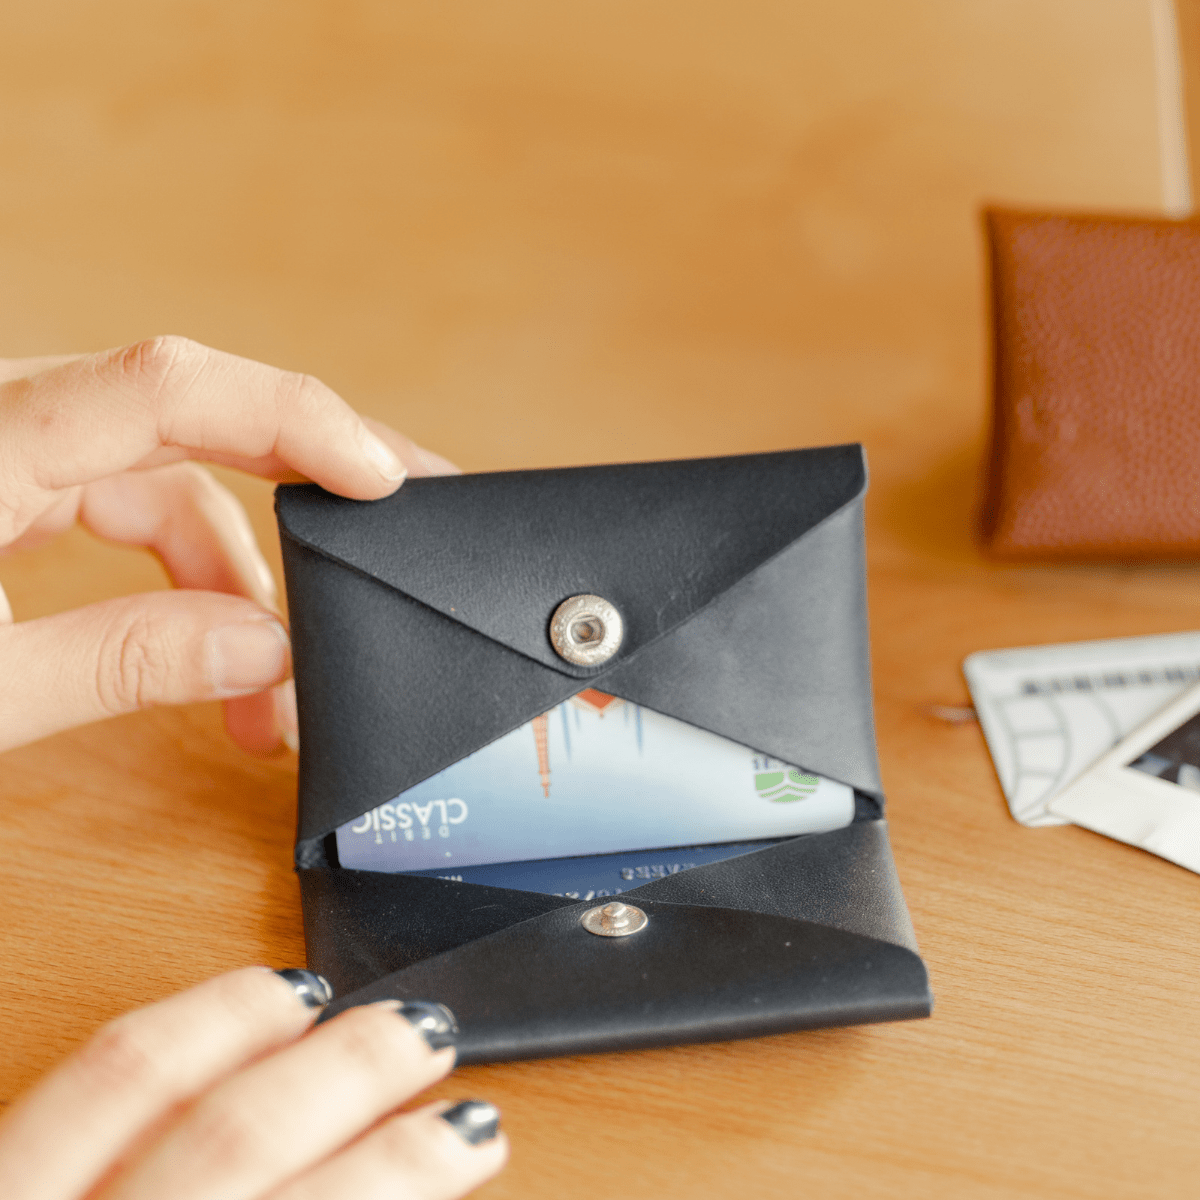 Sassy - The Real Smart Wallet